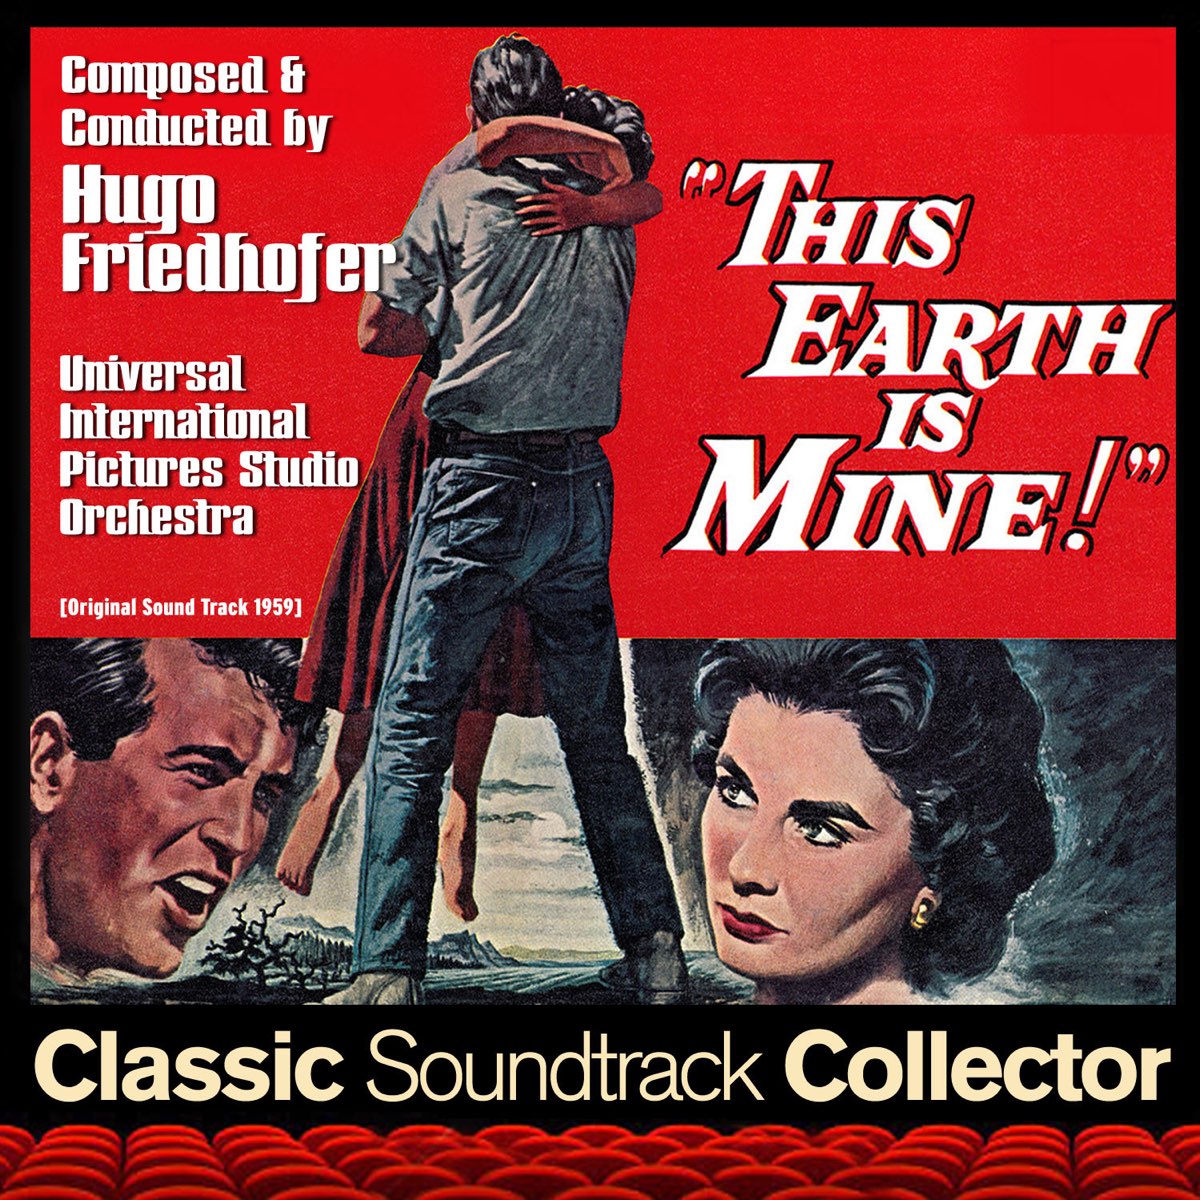 This Earth Is Mine (Original Soundtrack) [1959] by Hugo Friedhofer &  Universal International Pictures Studio Orchestra on Apple Music